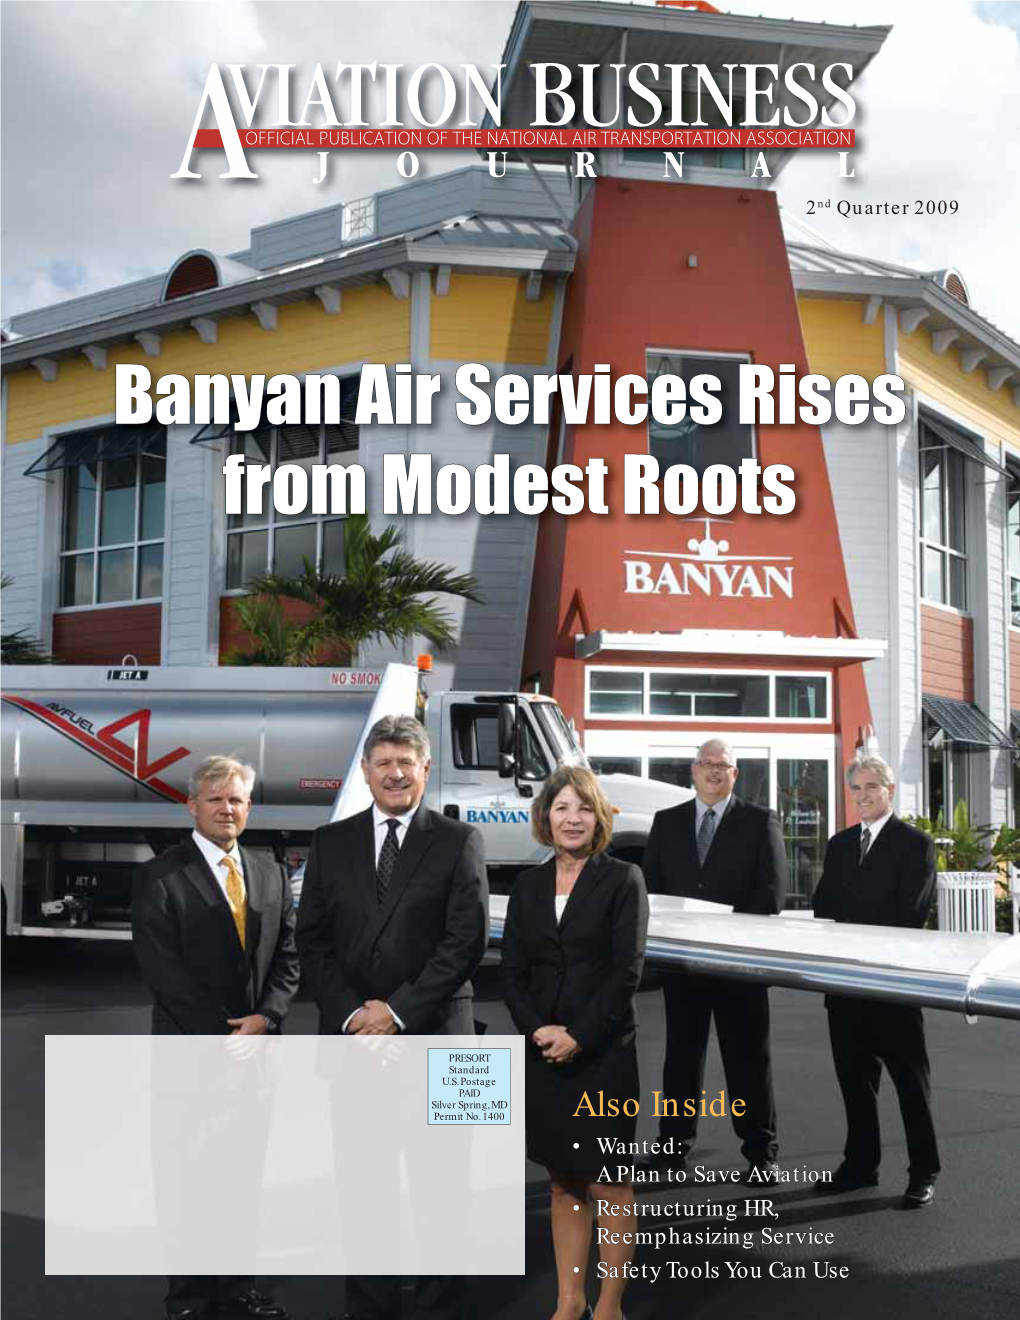 Banyan Air Services Rises from Modest Roots Teterboro, New Jersey Shoreline Aviation by Paul Seidenman and David J